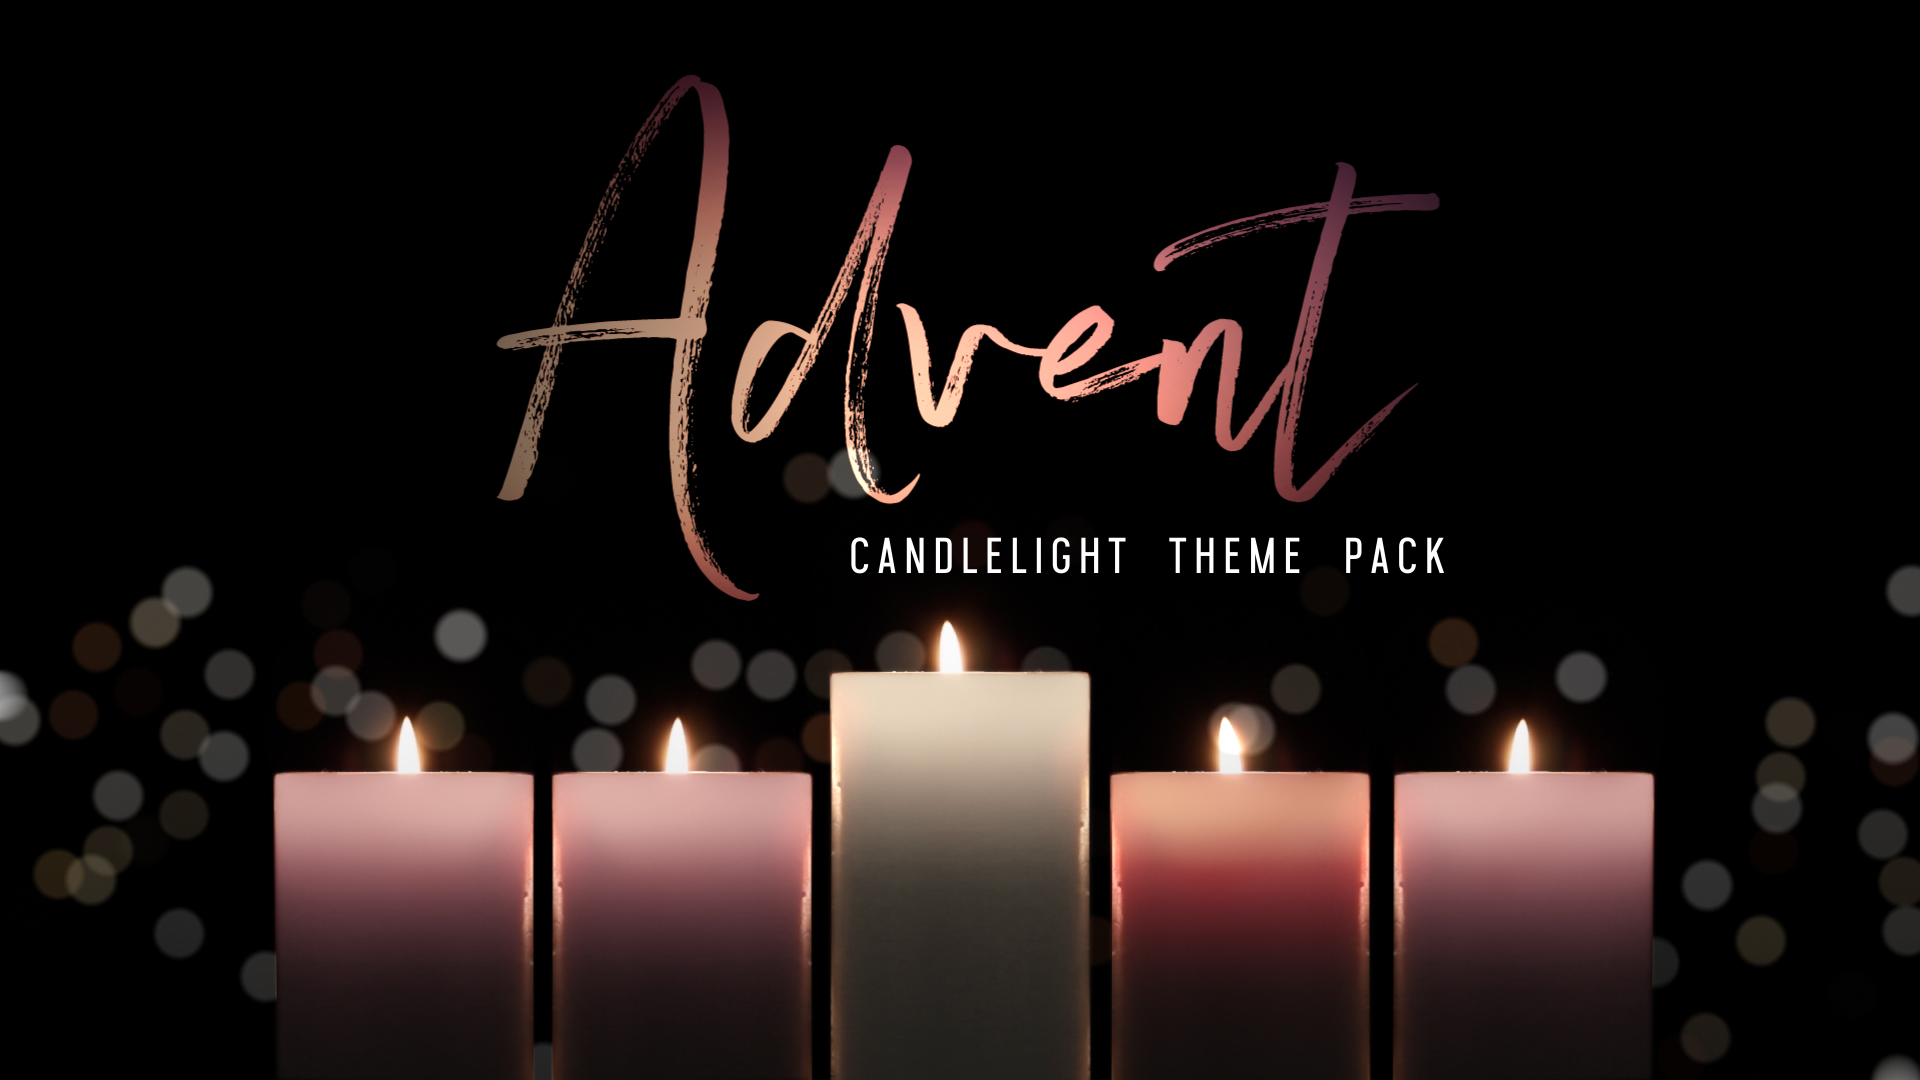 Advent Candlelight Theme Pack